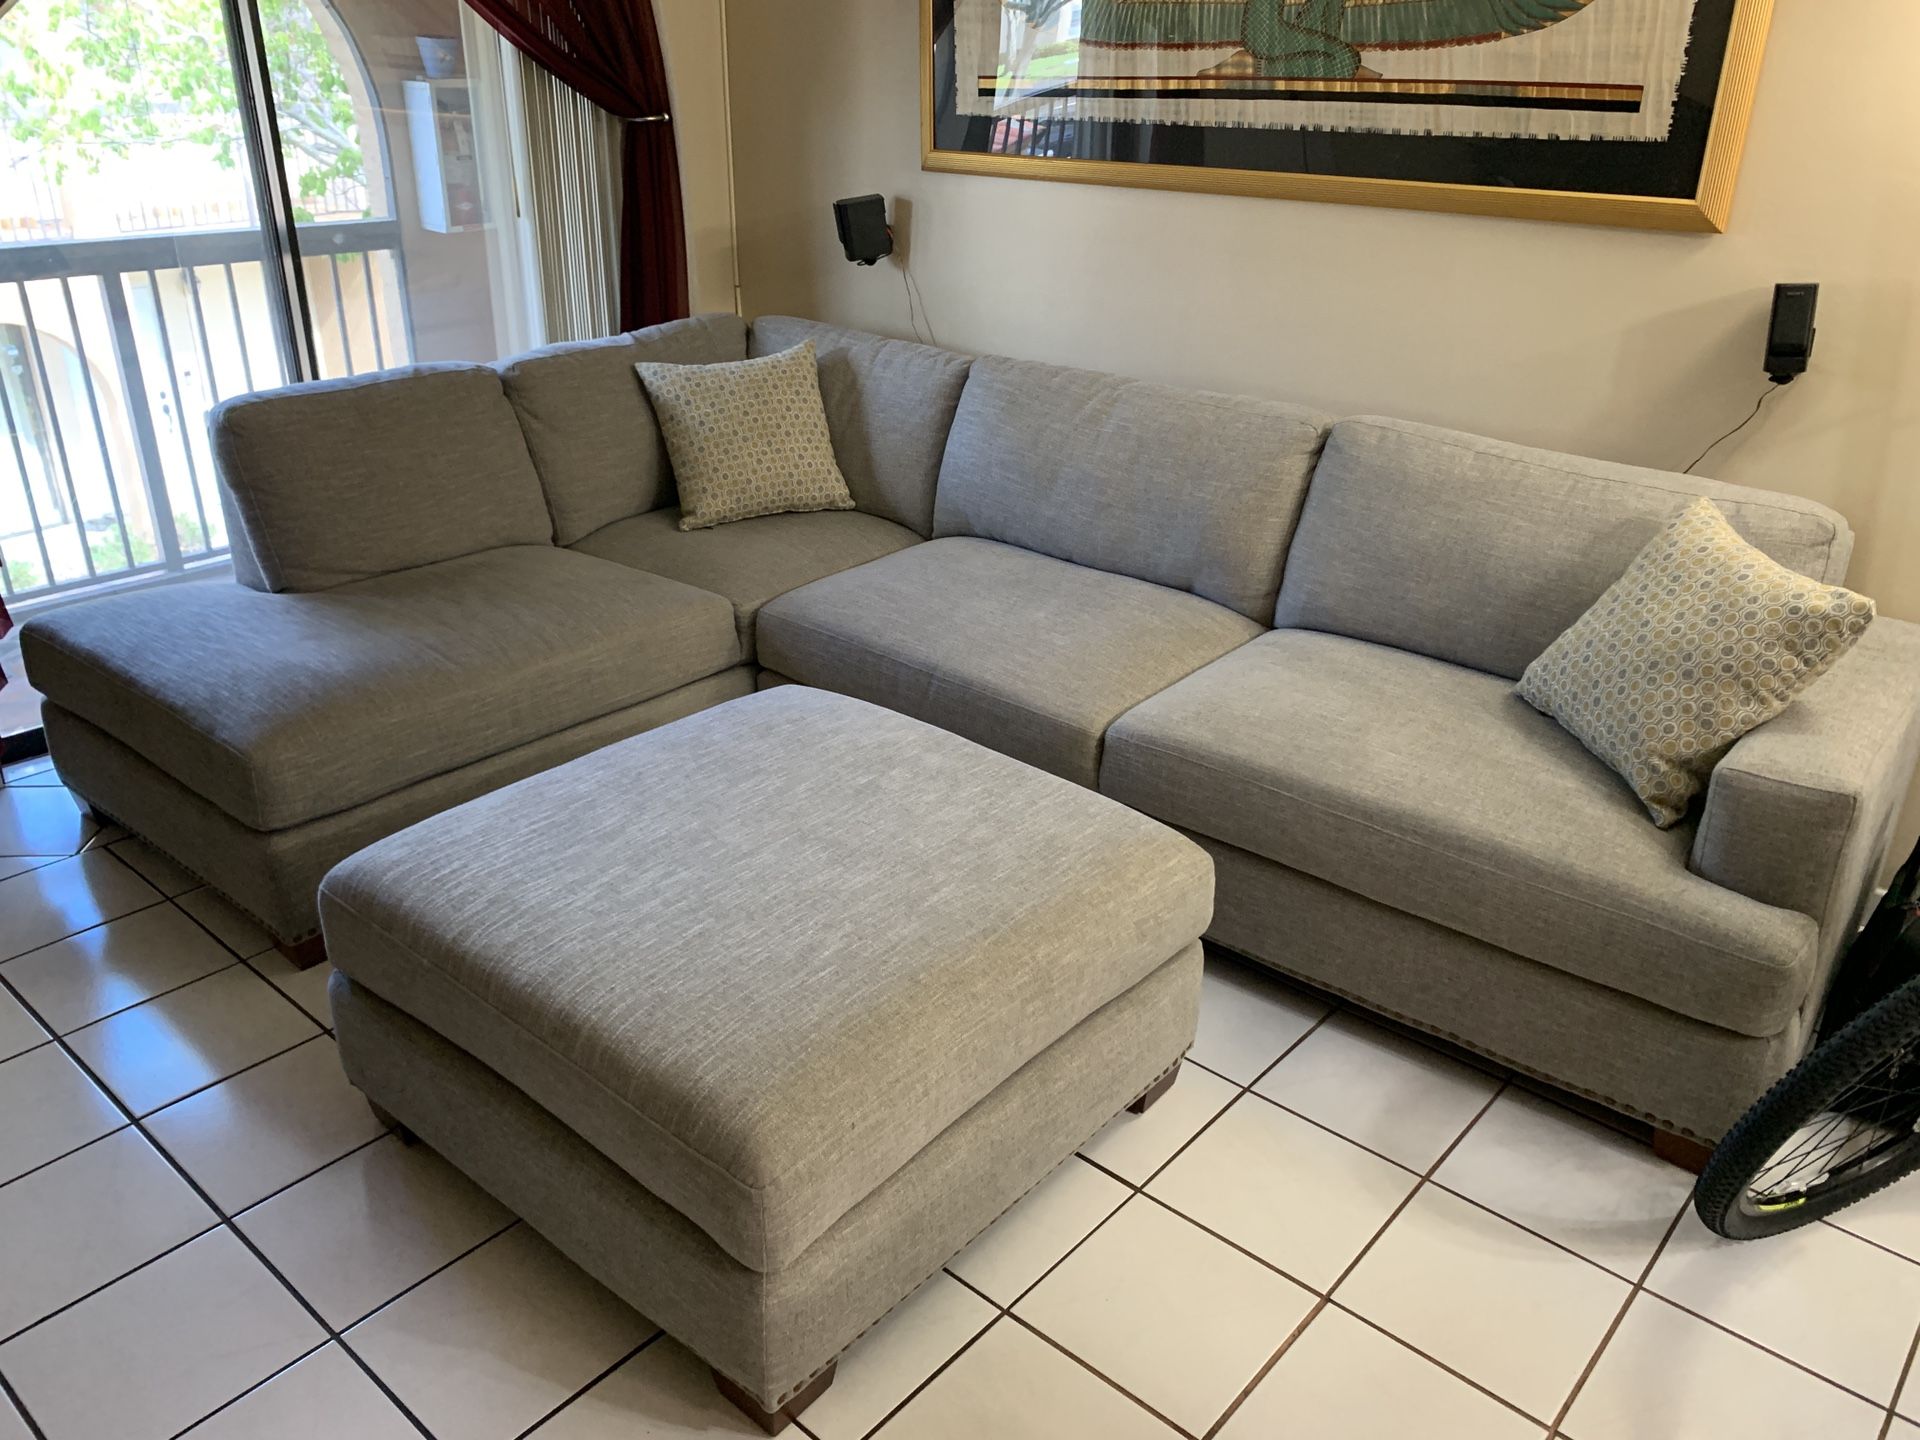 Almost new sofa set from Costco